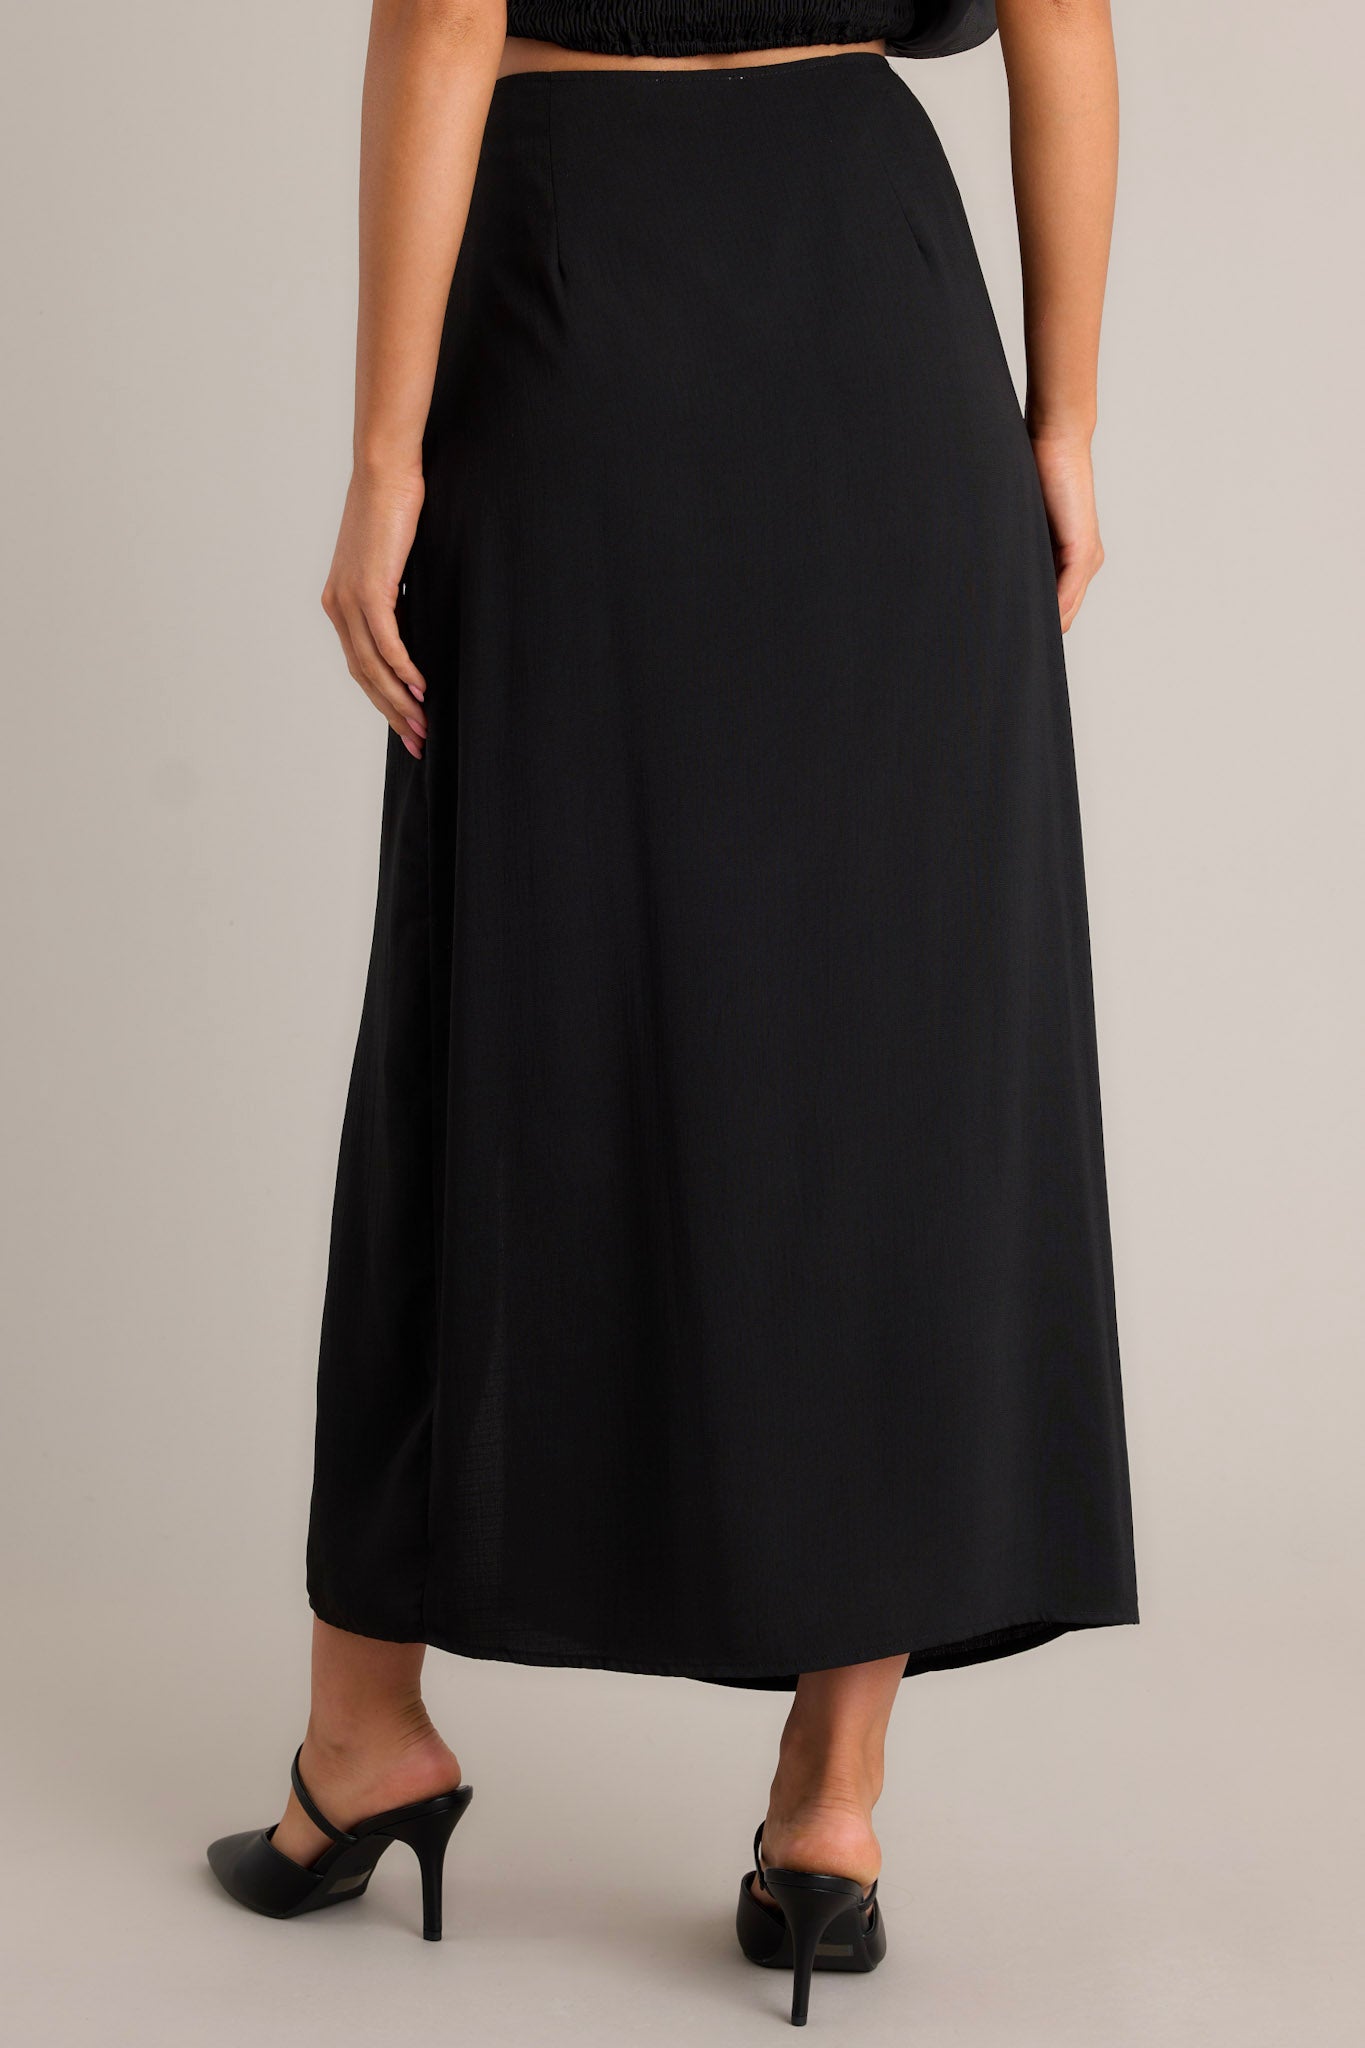 Back view of this black midi skirt featuring a high waisted design, pleated detailing on the hip, faux buttons, a discrete side zipper, and a side slit.